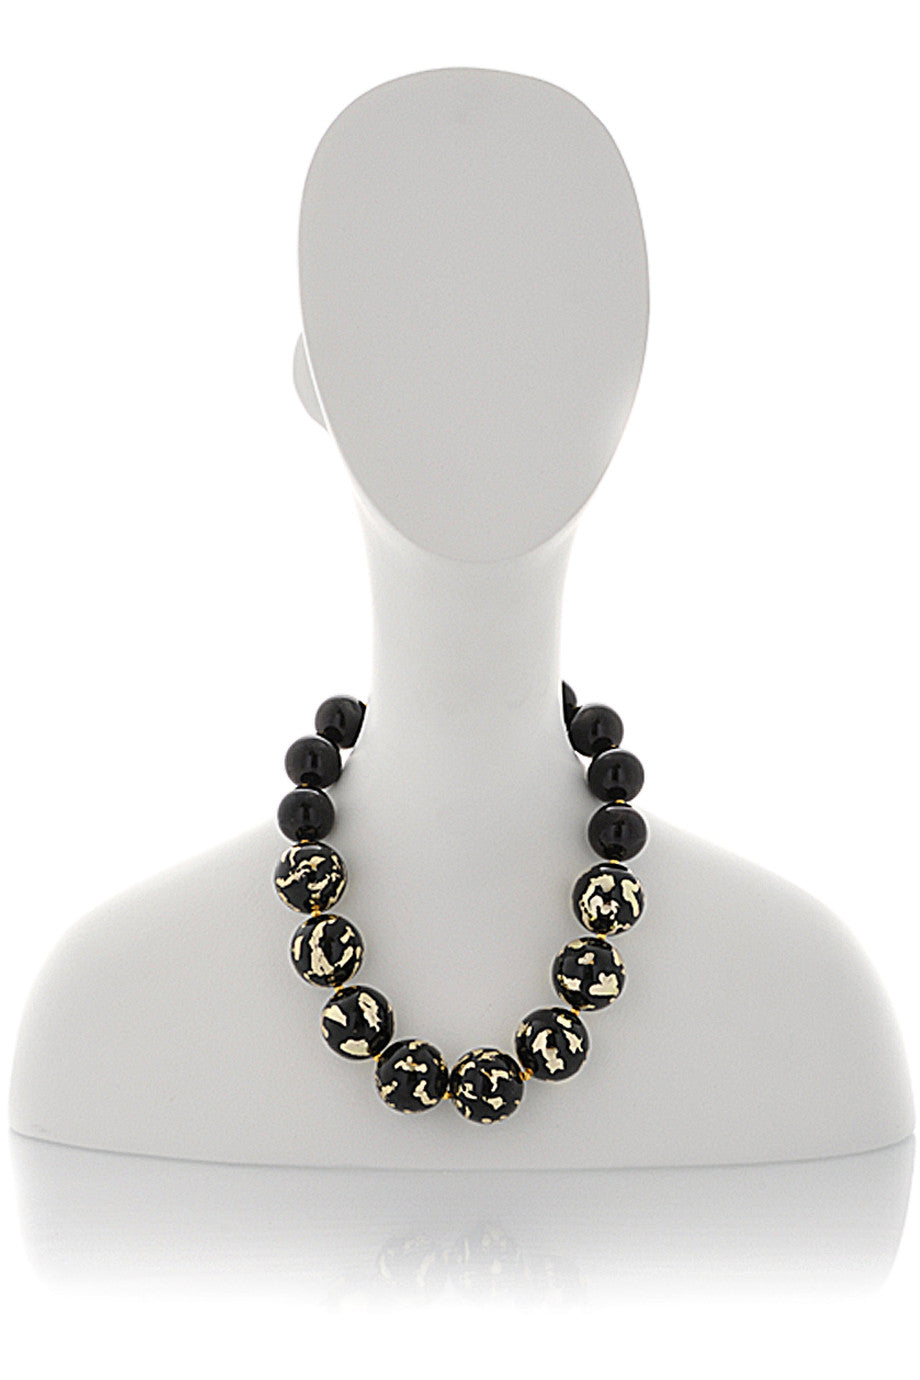  Black And White Statement Necklace